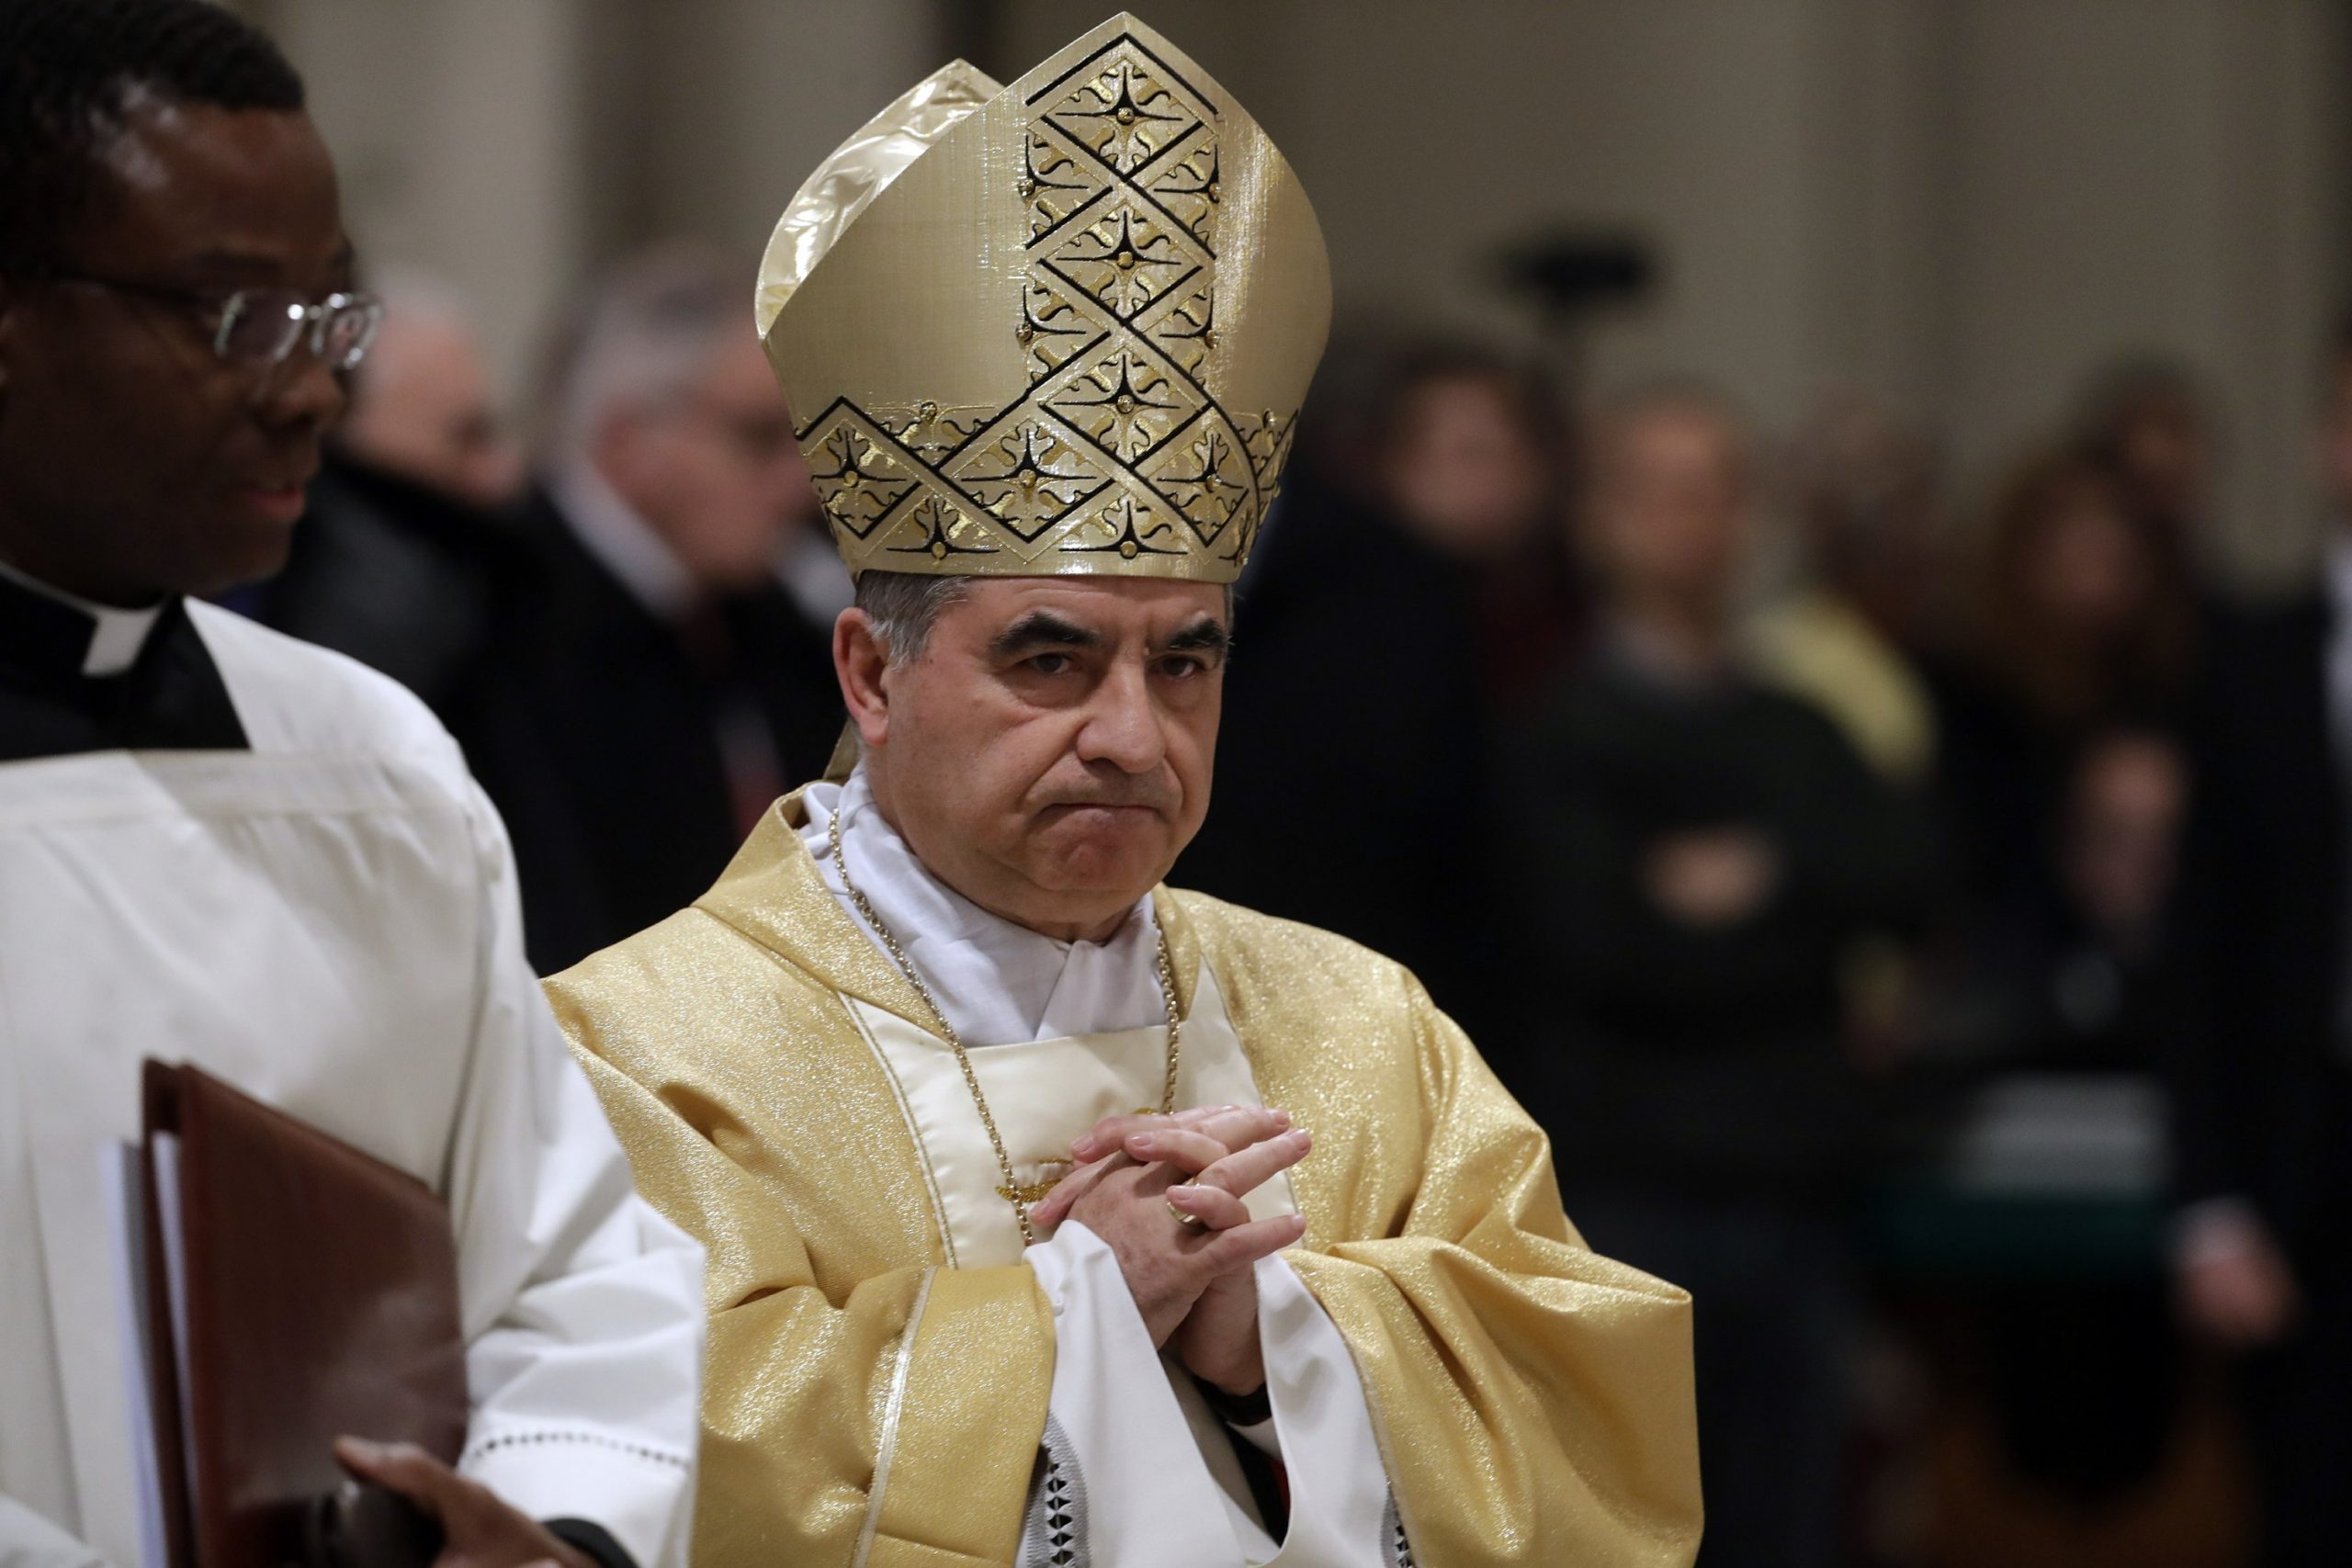 Powerful Vatican Cardinal Bessio resigns amid scandal